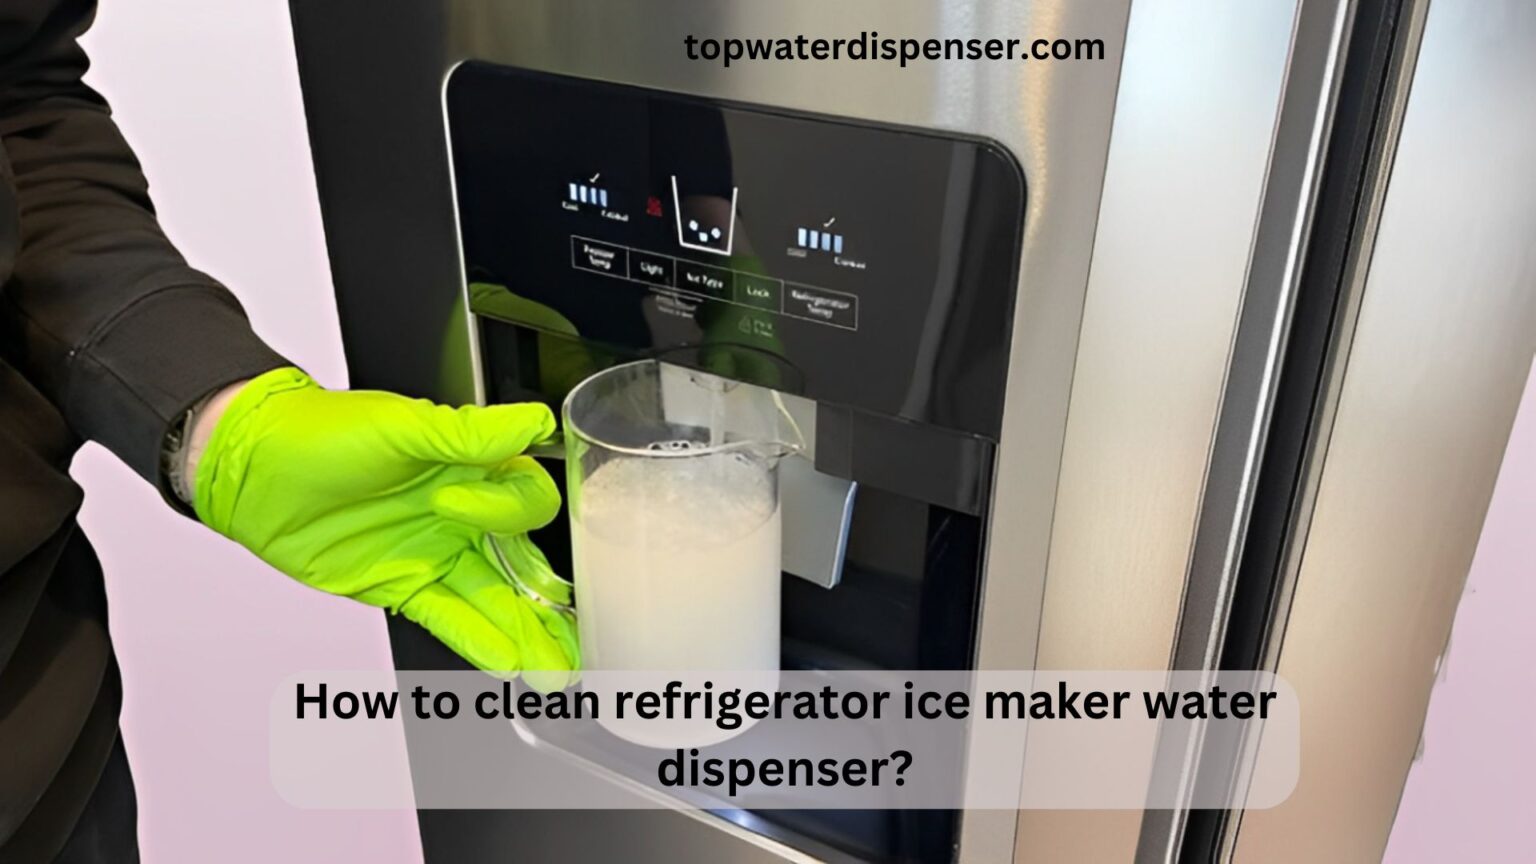 How to clean refrigerator ice maker water dispenser?